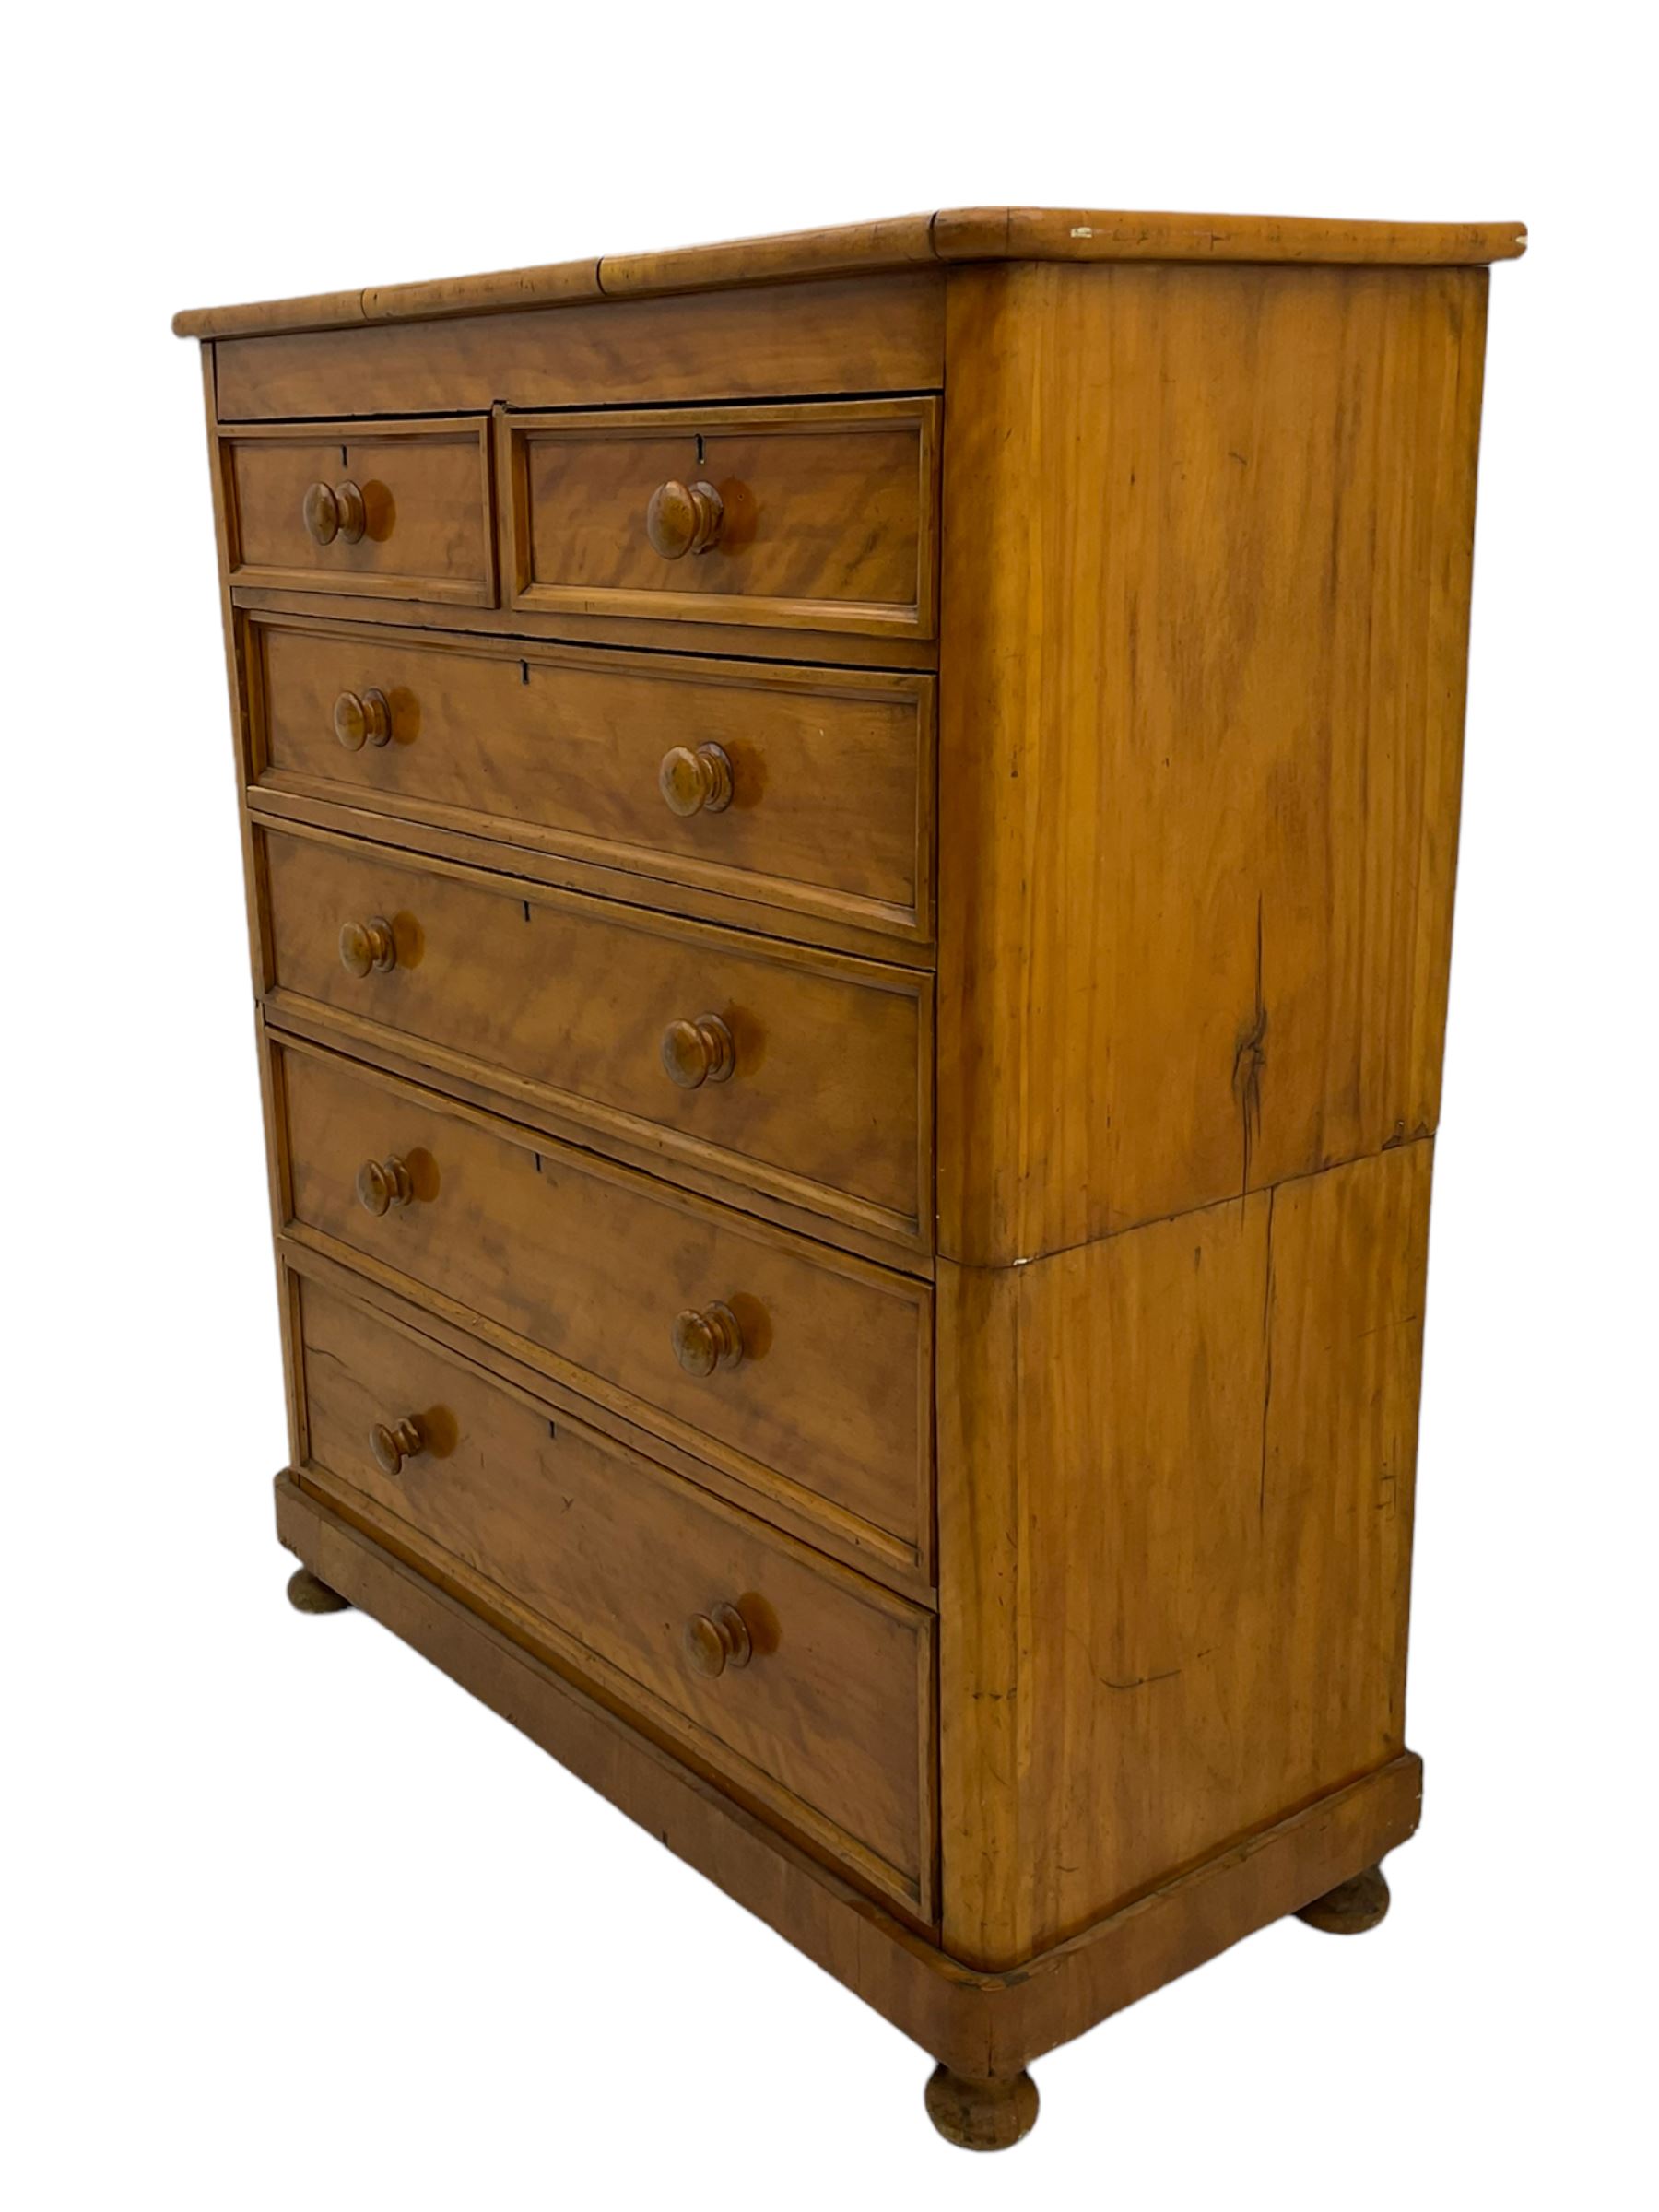 Victorian satinwood chest - Image 2 of 8